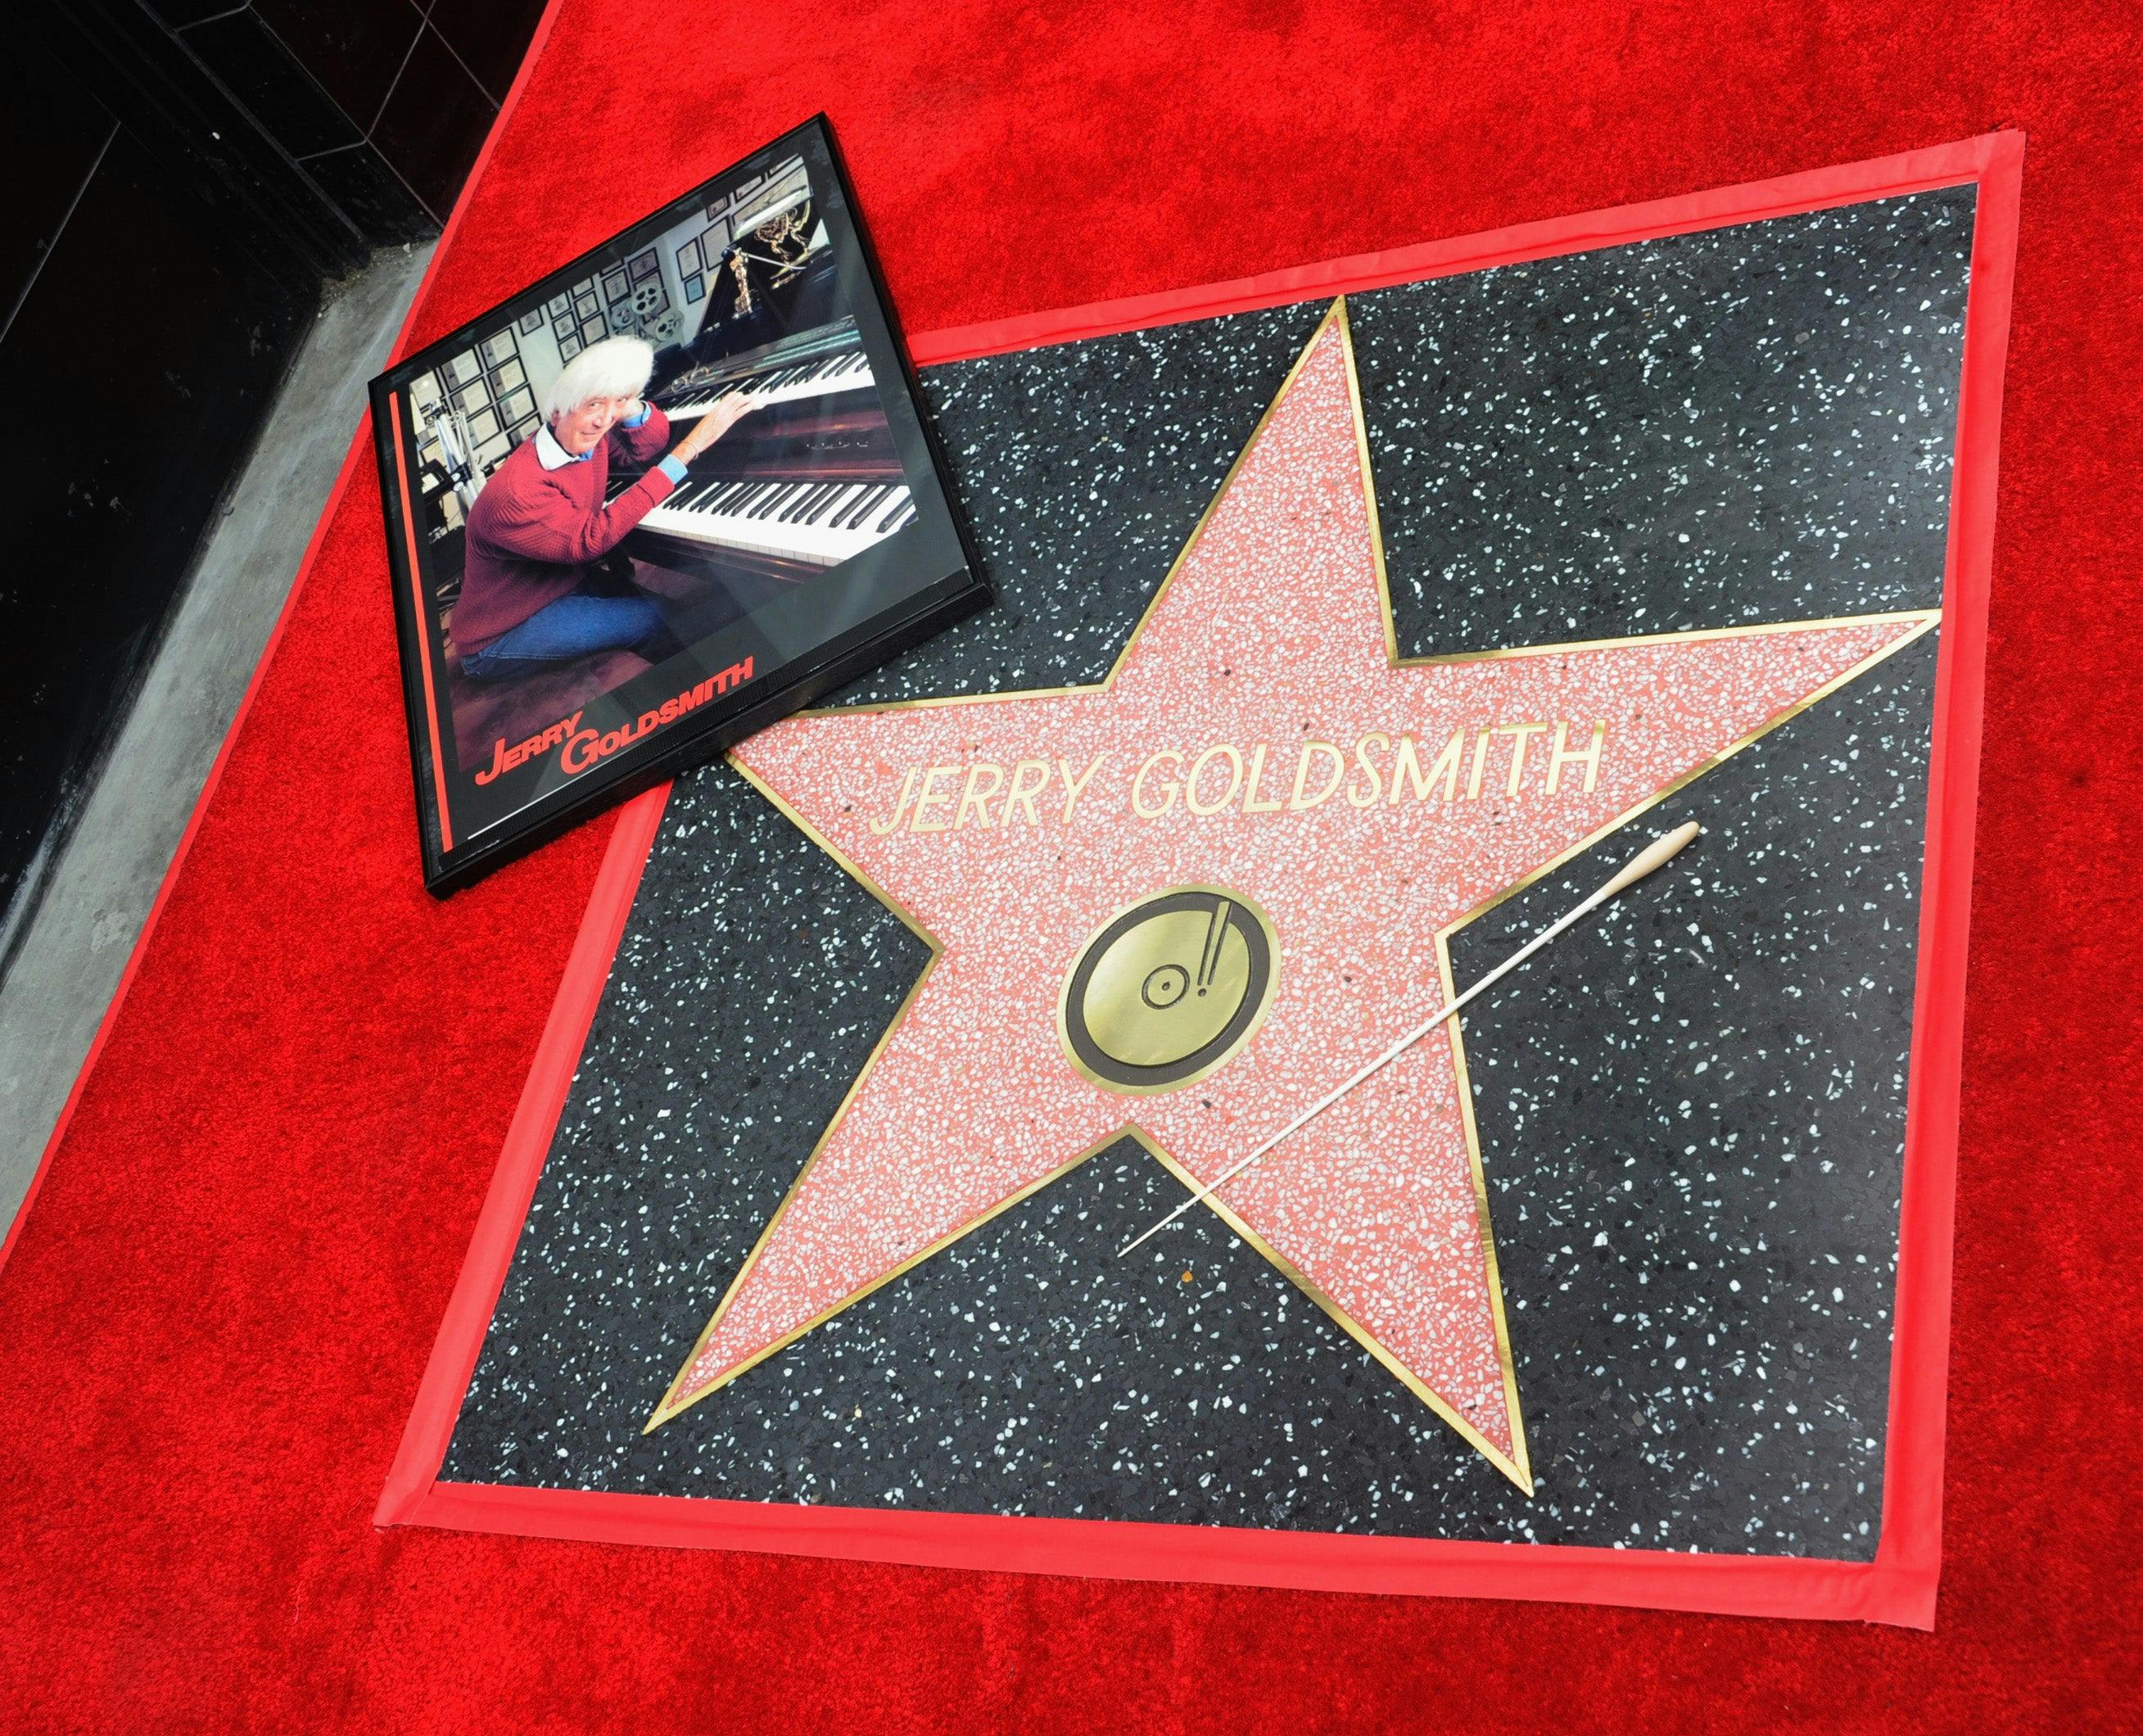 Close-up of Jerry Goldsmith's Hollywood Walk of Fame star along with a framed image of the composer at his piano along with a conductor's baton resting on the star